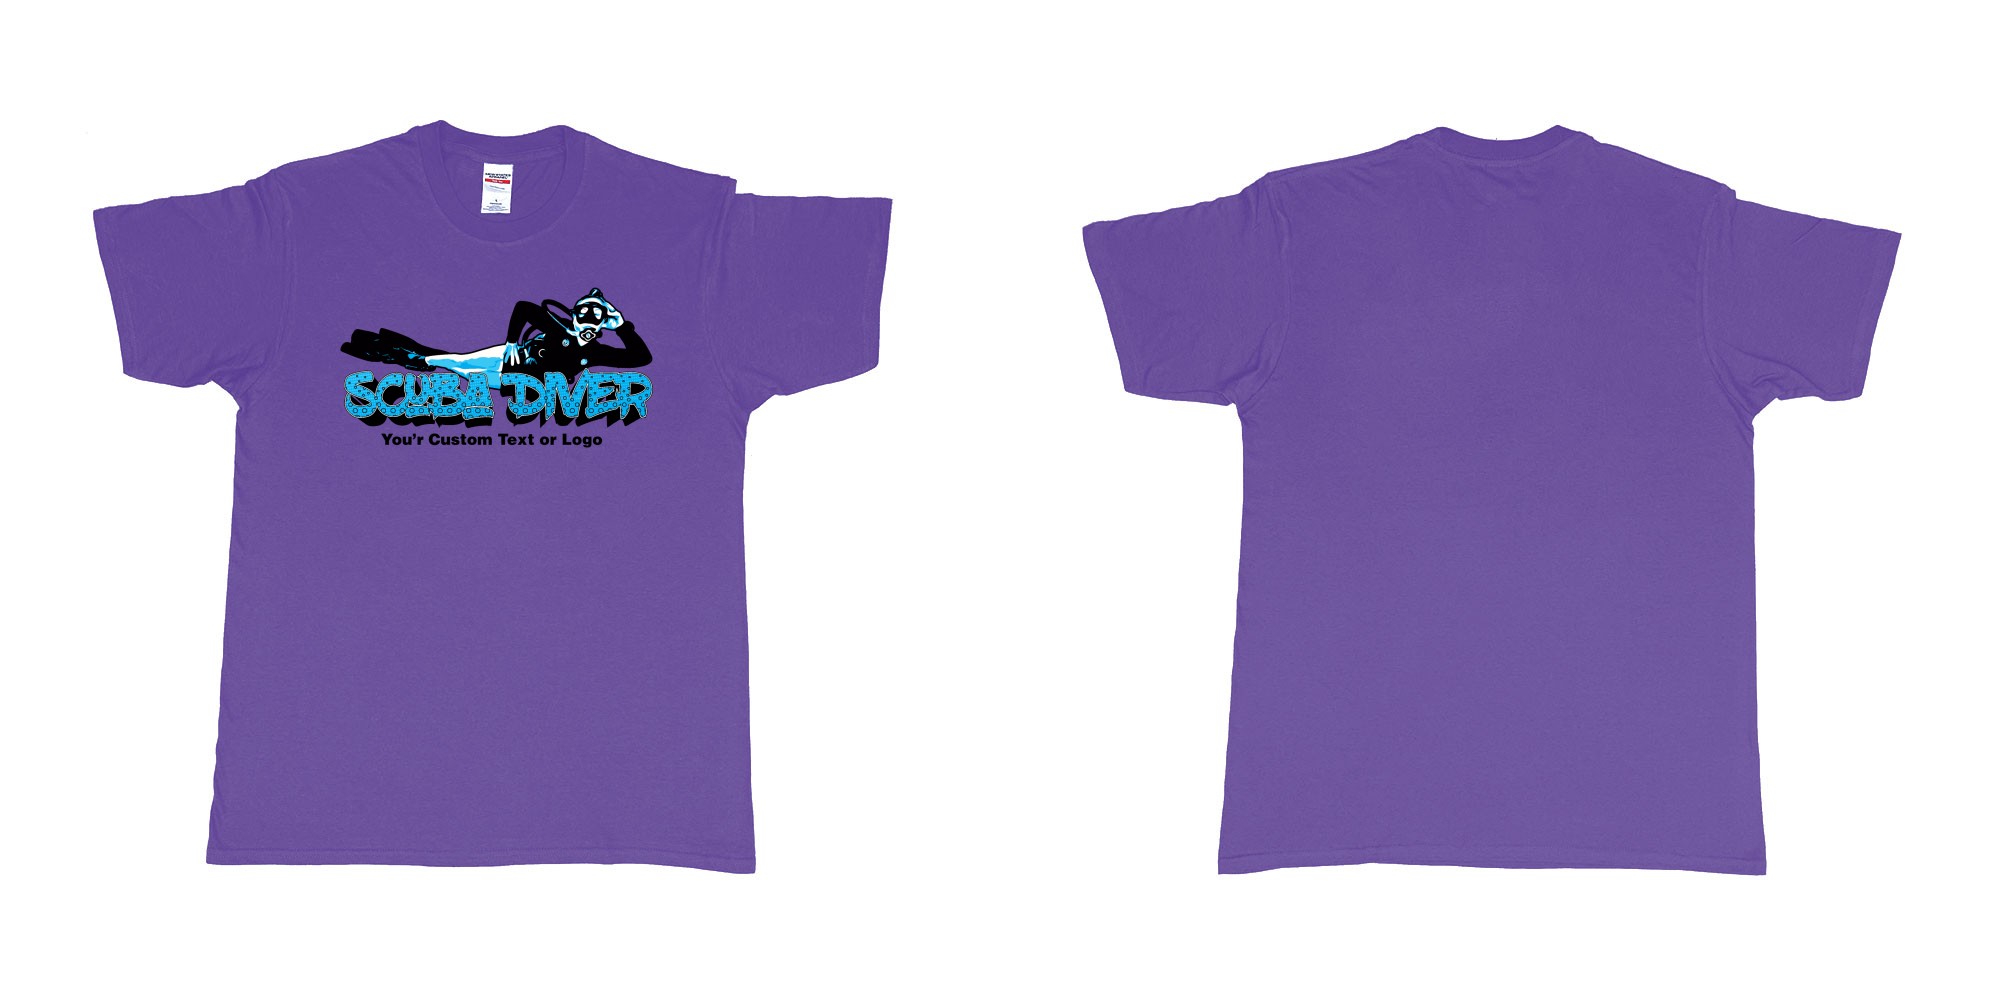 Custom tshirt design relaxed scuba diver in fabric color purple choice your own text made in Bali by The Pirate Way